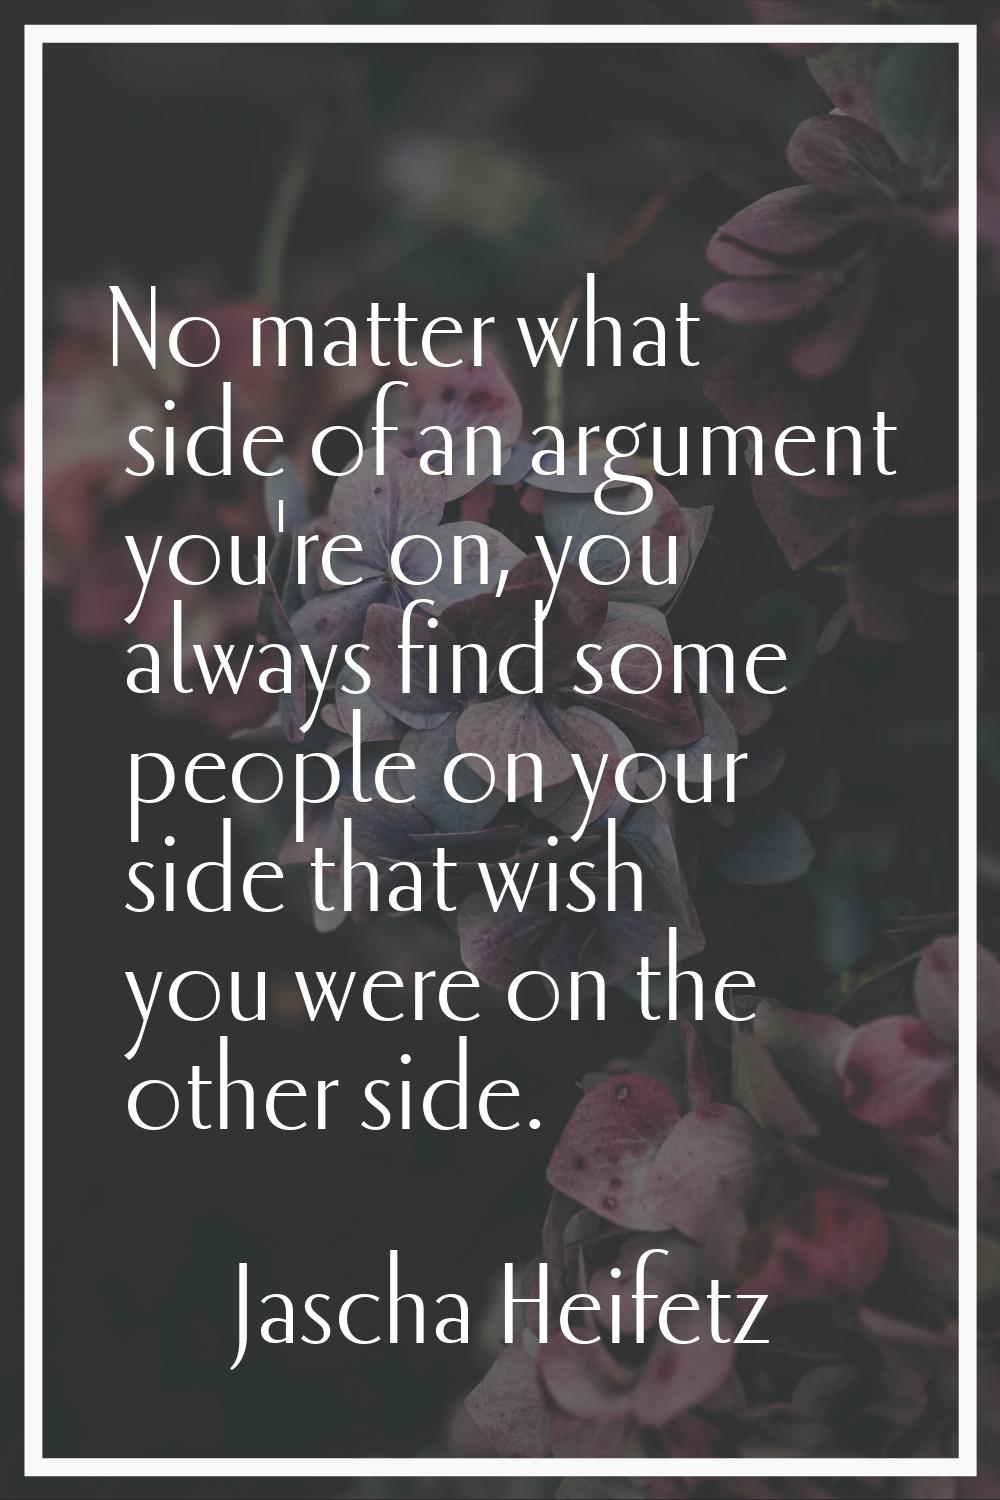 No matter what side of an argument you're on, you always find some people on your side that wish yo